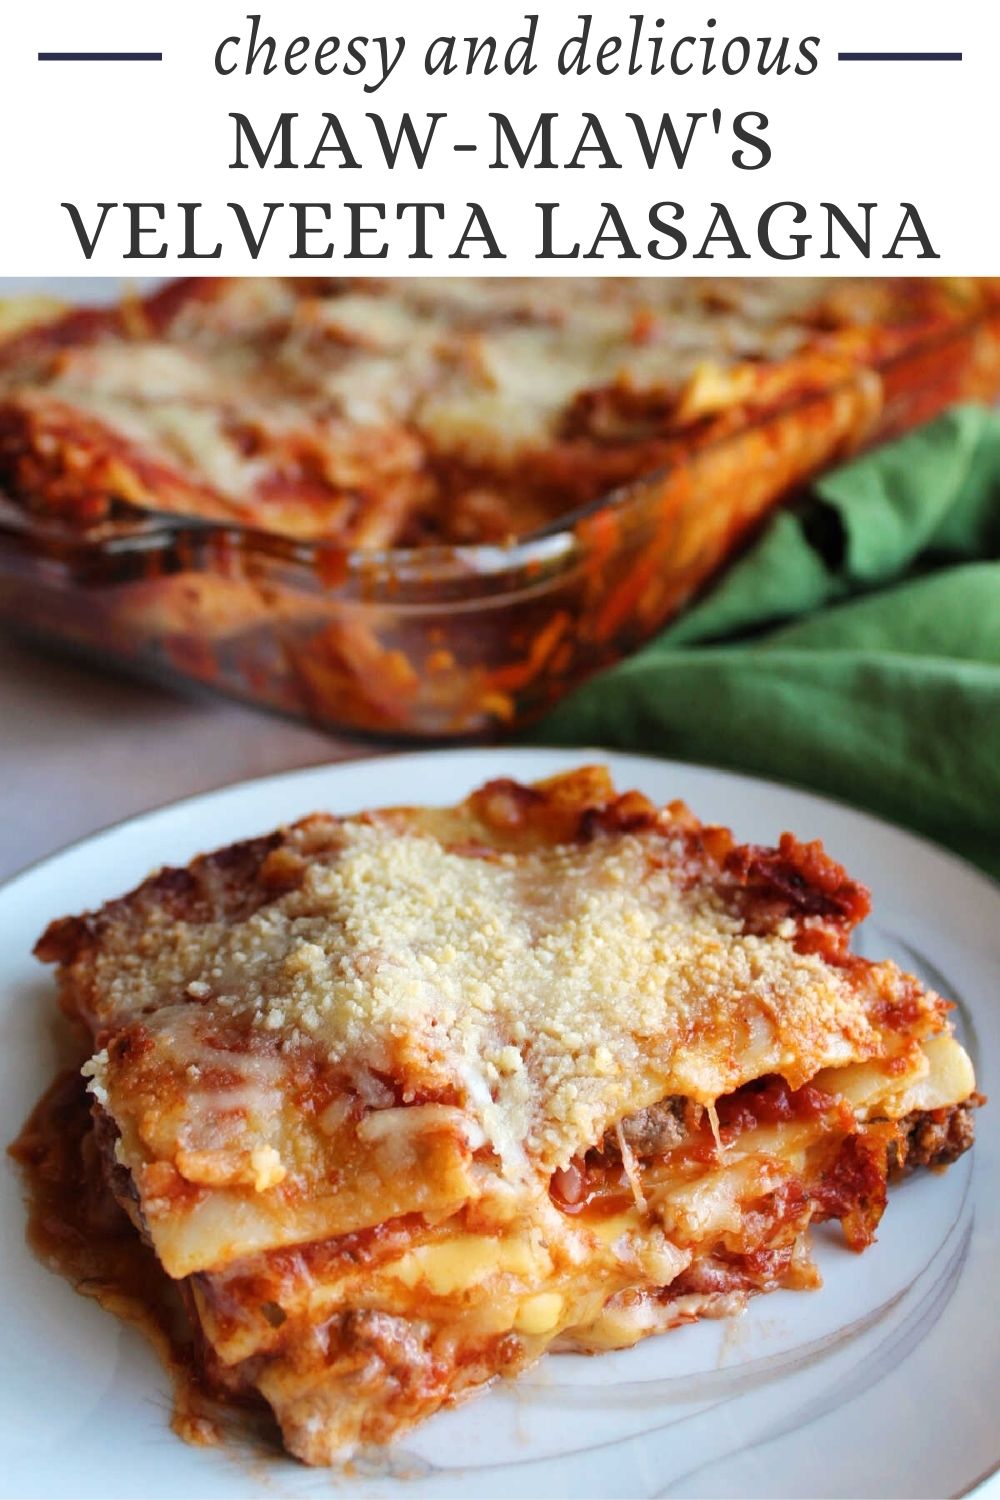 My Maw-Maw's lasagna recipe has a few surprising ingredients that likely make it a bit different from the one you grew up with, but it is so delicious. You have to make some for dinner soon!